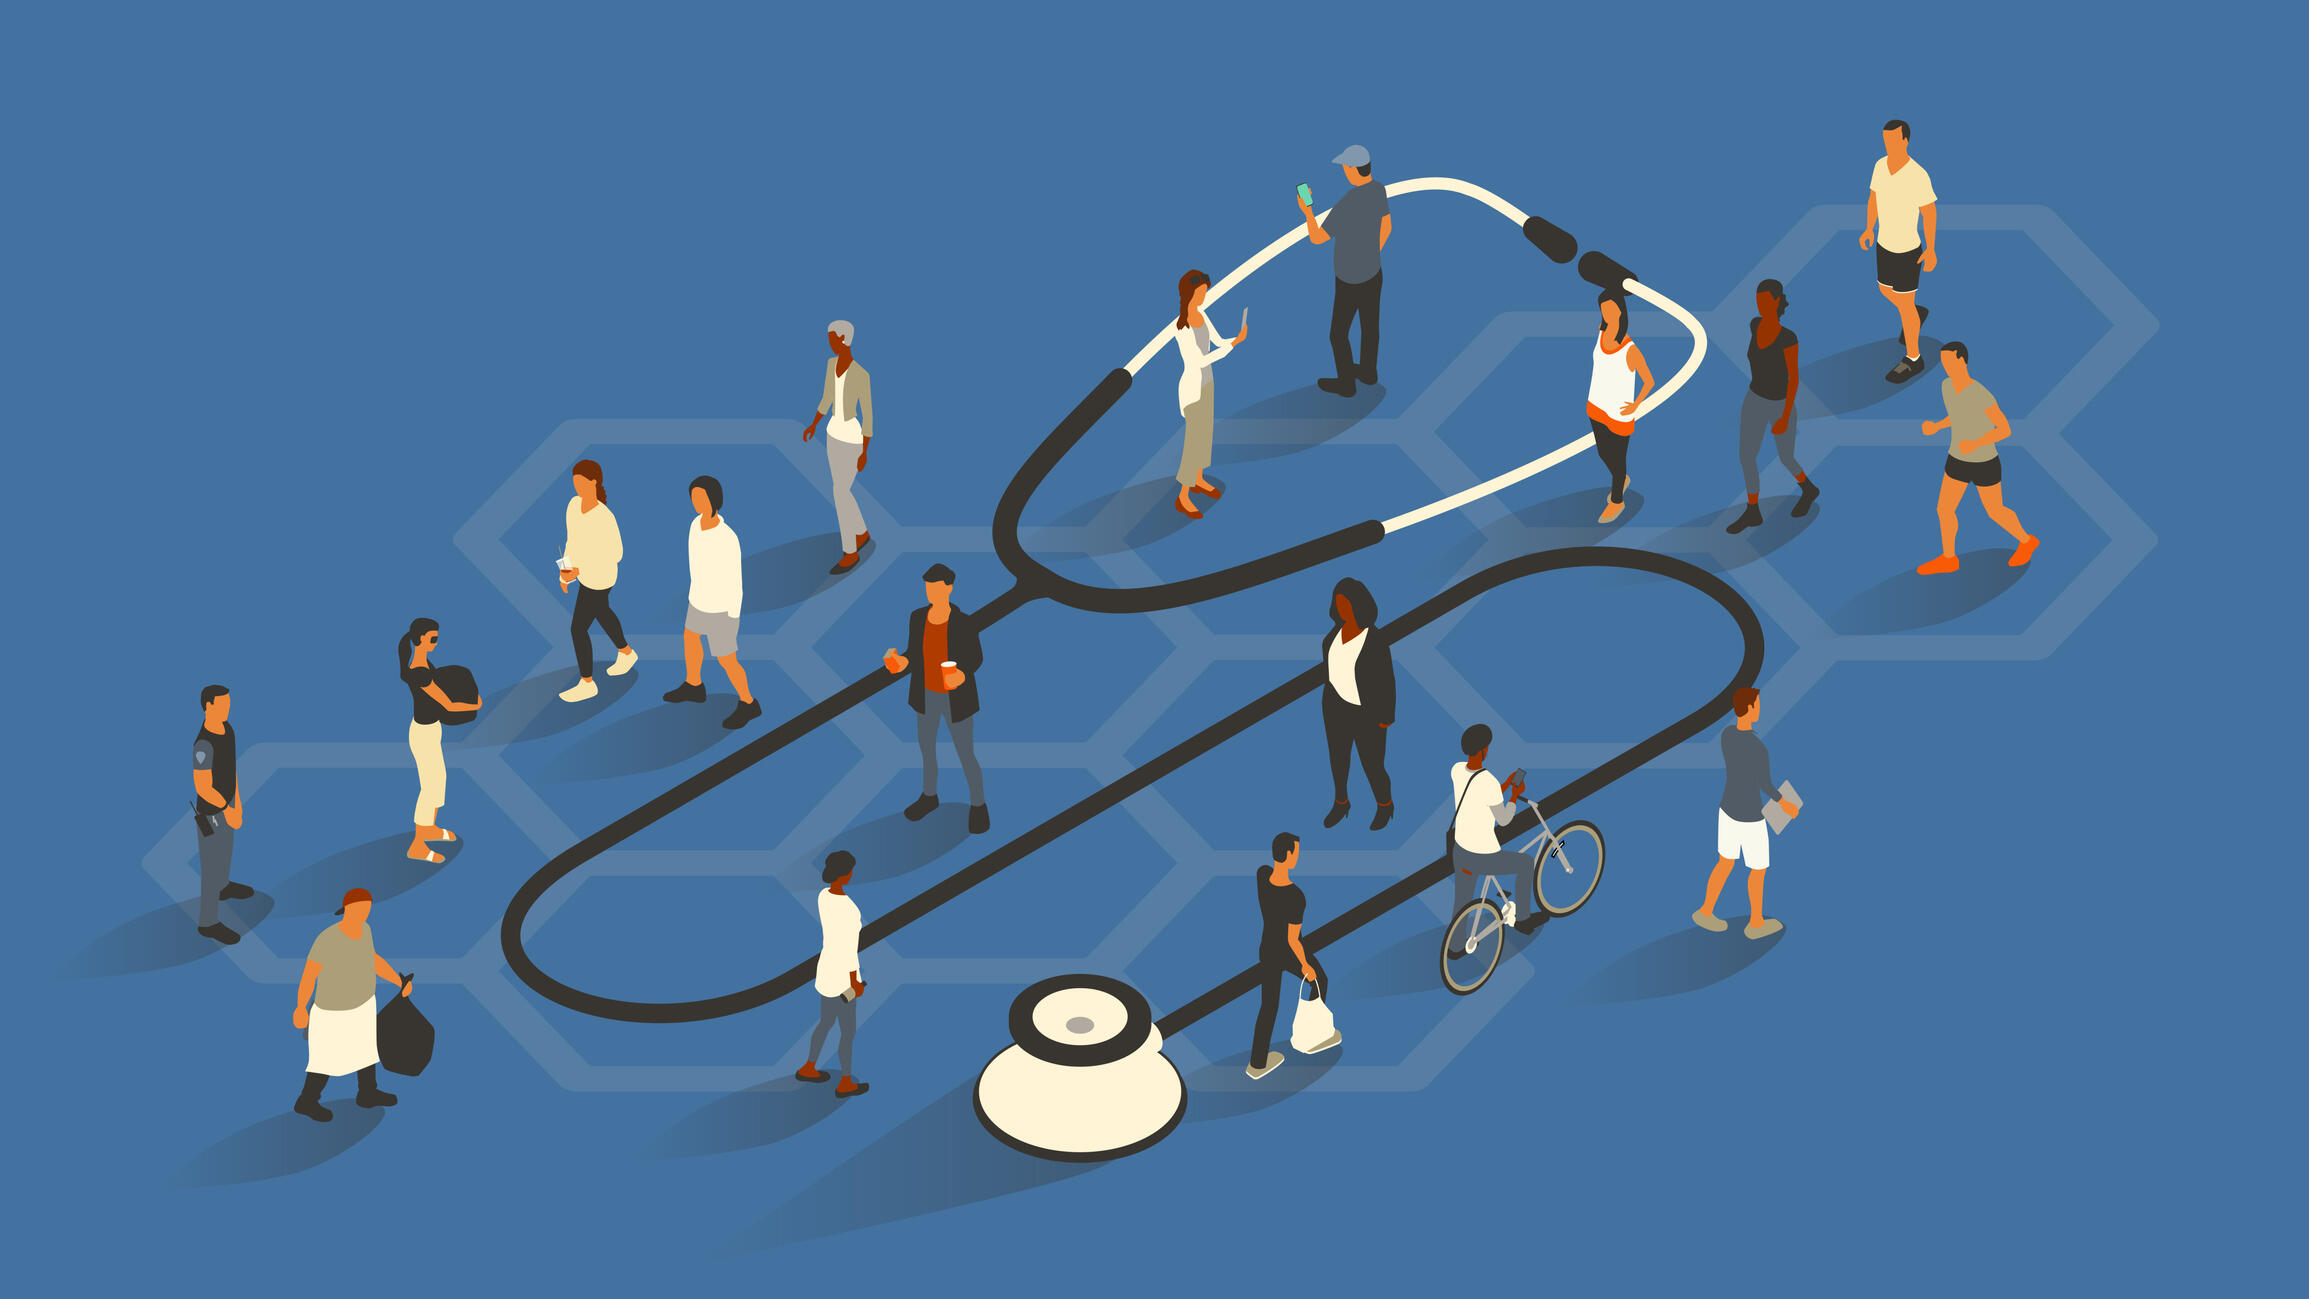 An illustration of 18 people walking and standing around a giant stethoscope.